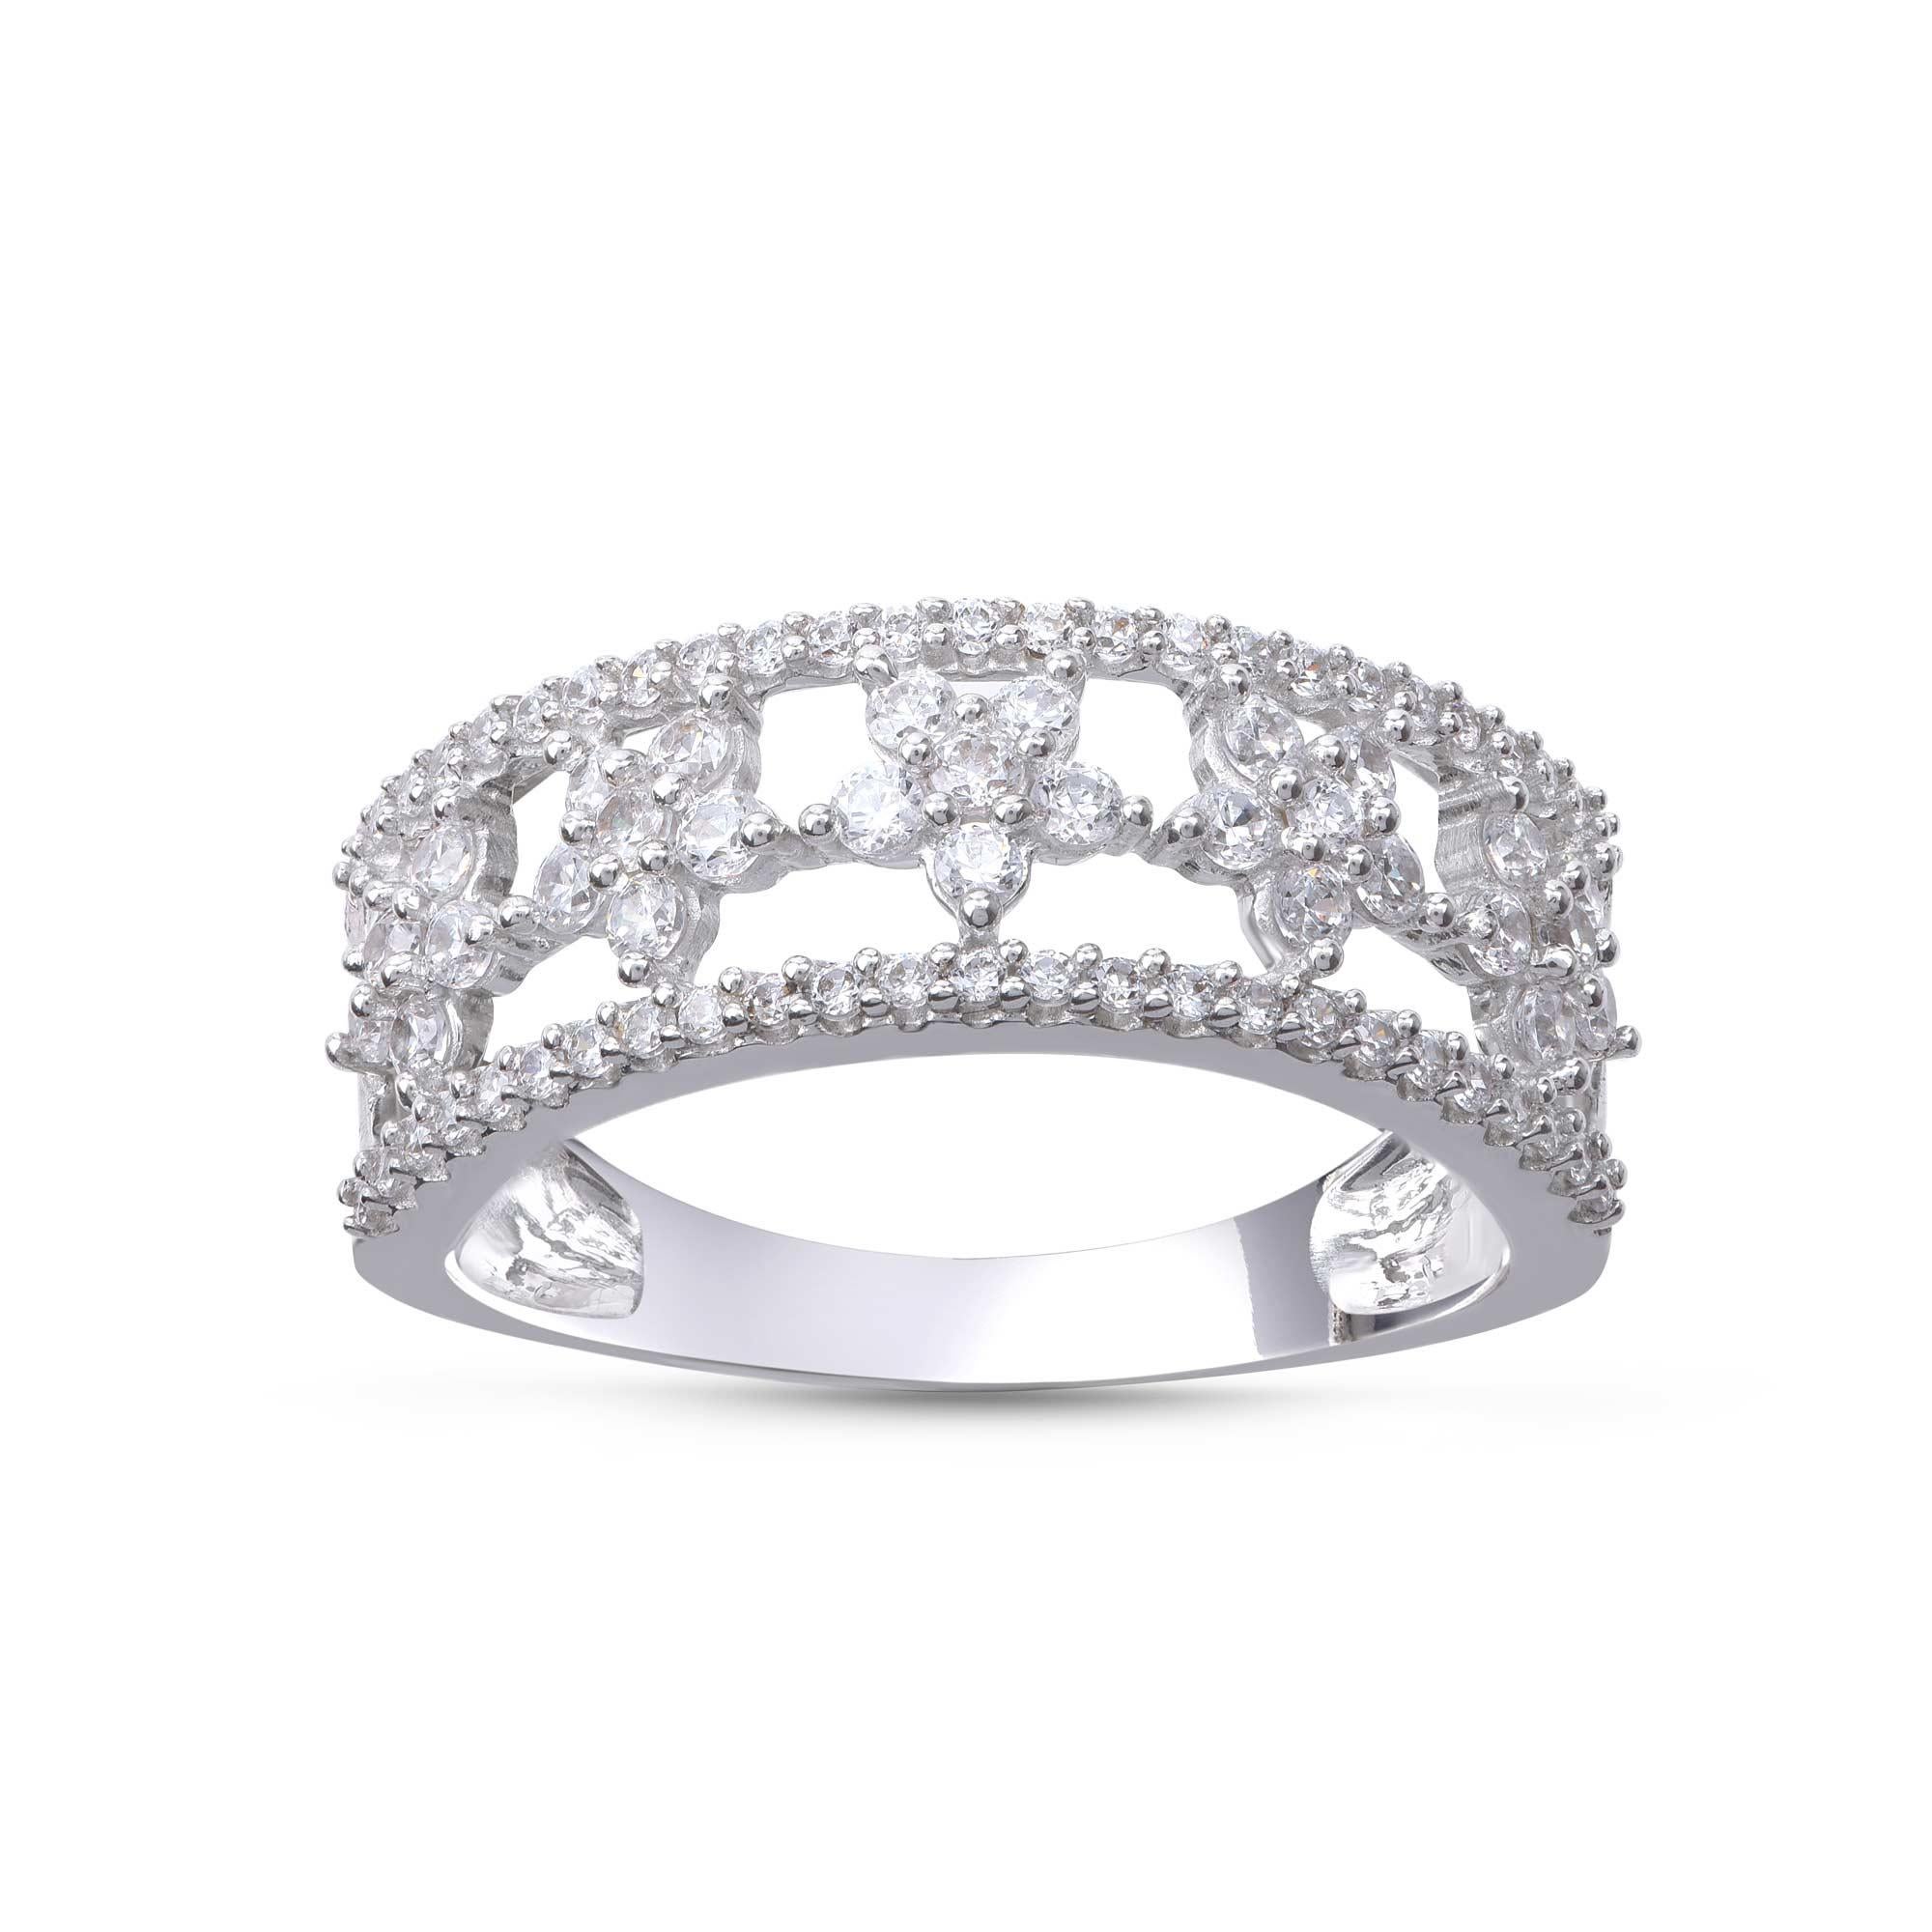 Embellished with round brilliant-cut diamonds set beautifully in prong setting and fashioned in 18 kt white gold. Diamonds are graded H-I Color, I2 Clarity. 

Metal color and ring size can be customized on request. 

This piece is made to order.